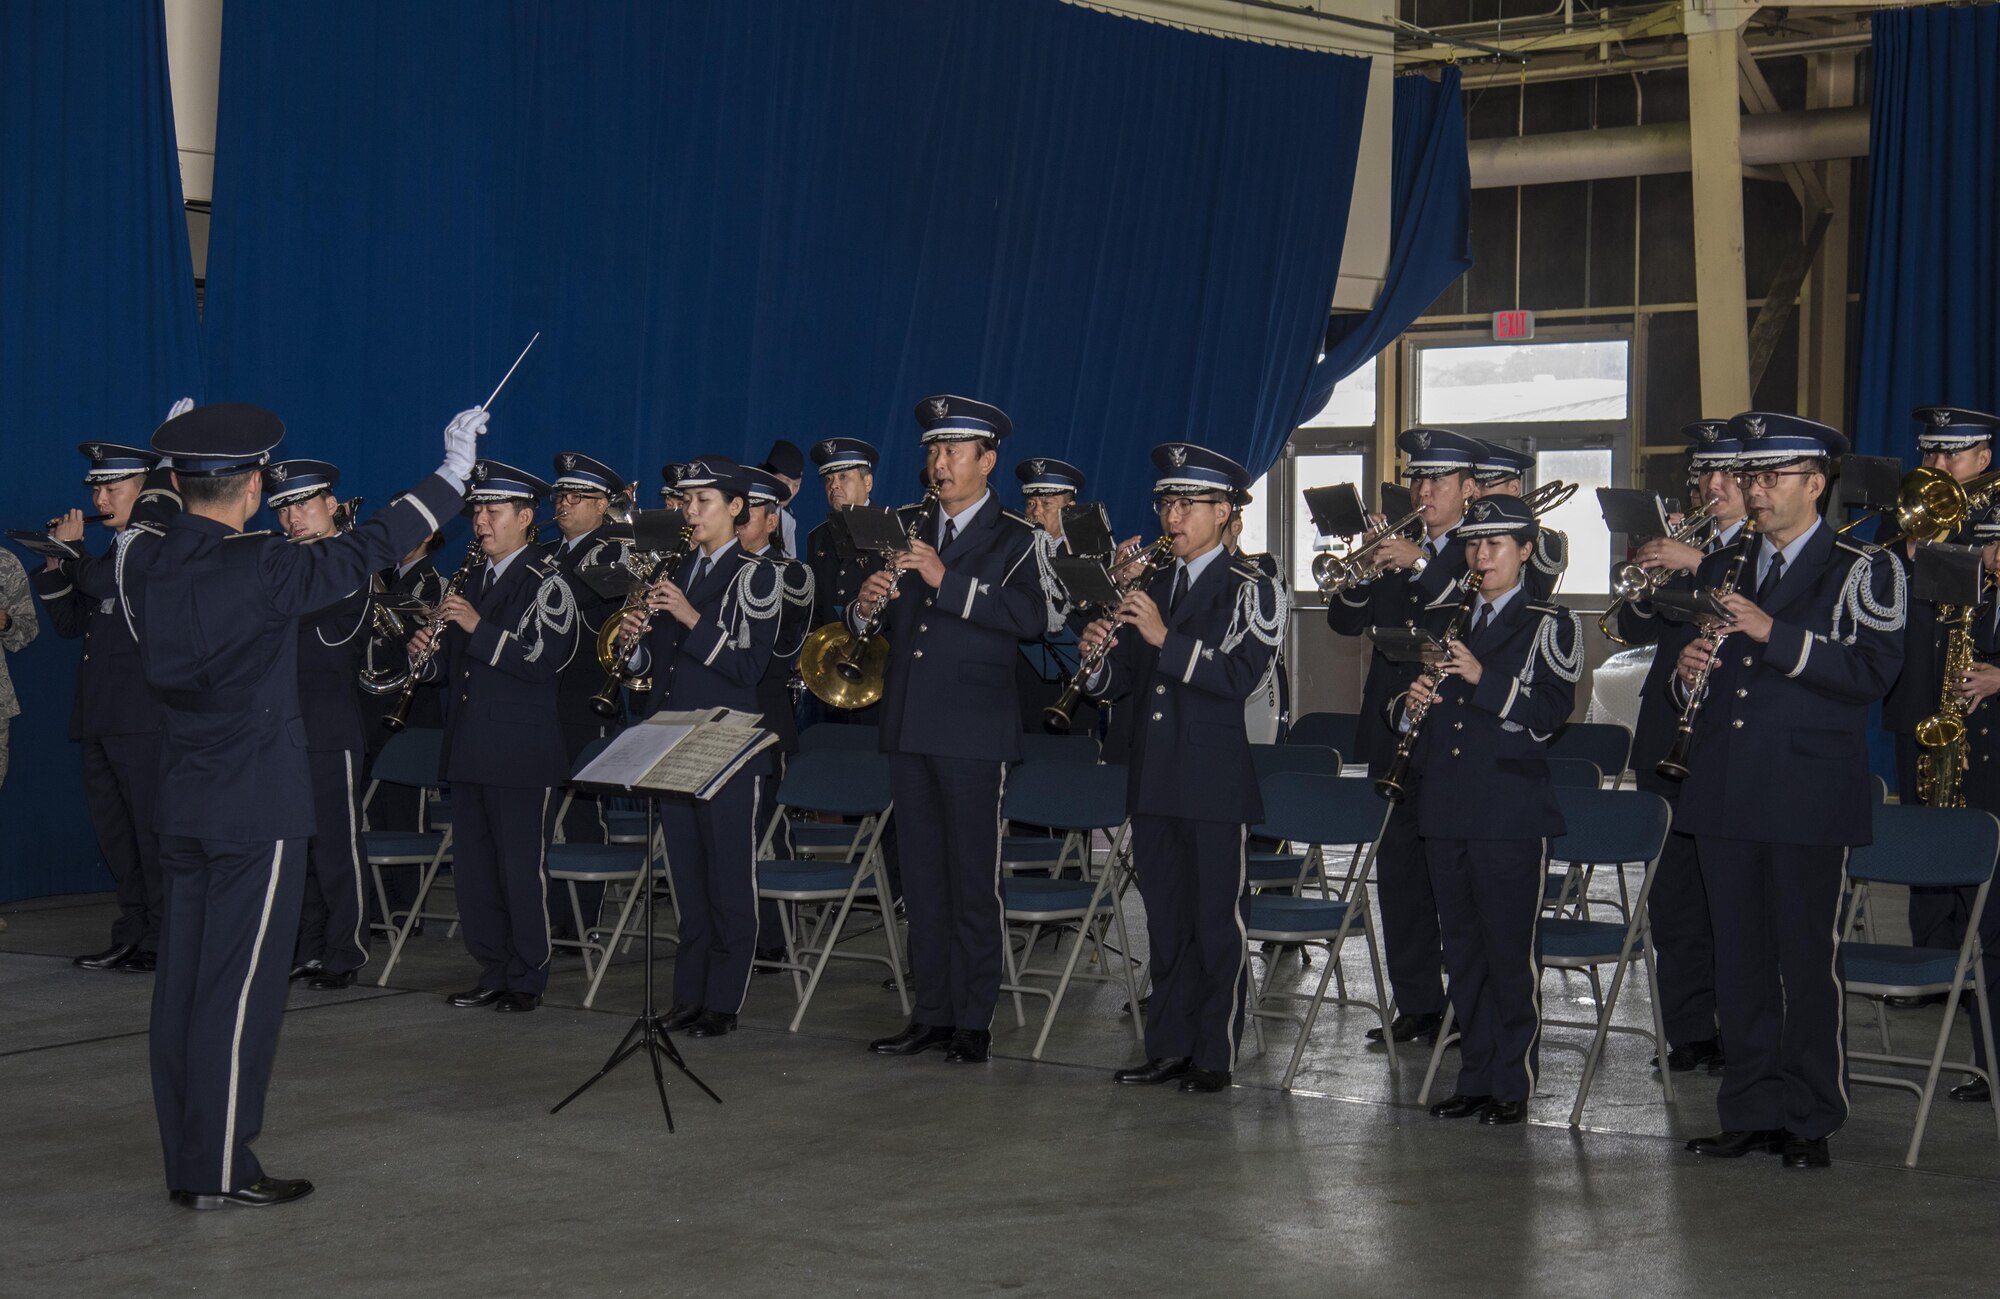 The Japan Air Self-Defense Force band plays during the 35th Fighter Wing change of command ceremony at Misawa Air Base, Japan, July 7, 2016. The ceremony was held to formally showcase the transfer of wing leadership from U.S. Air Force Col. Timothy Sundvall to Col. R. Scott Jobe. (U.S. Air Force photo by Senior Airman Jordyn Fetter)